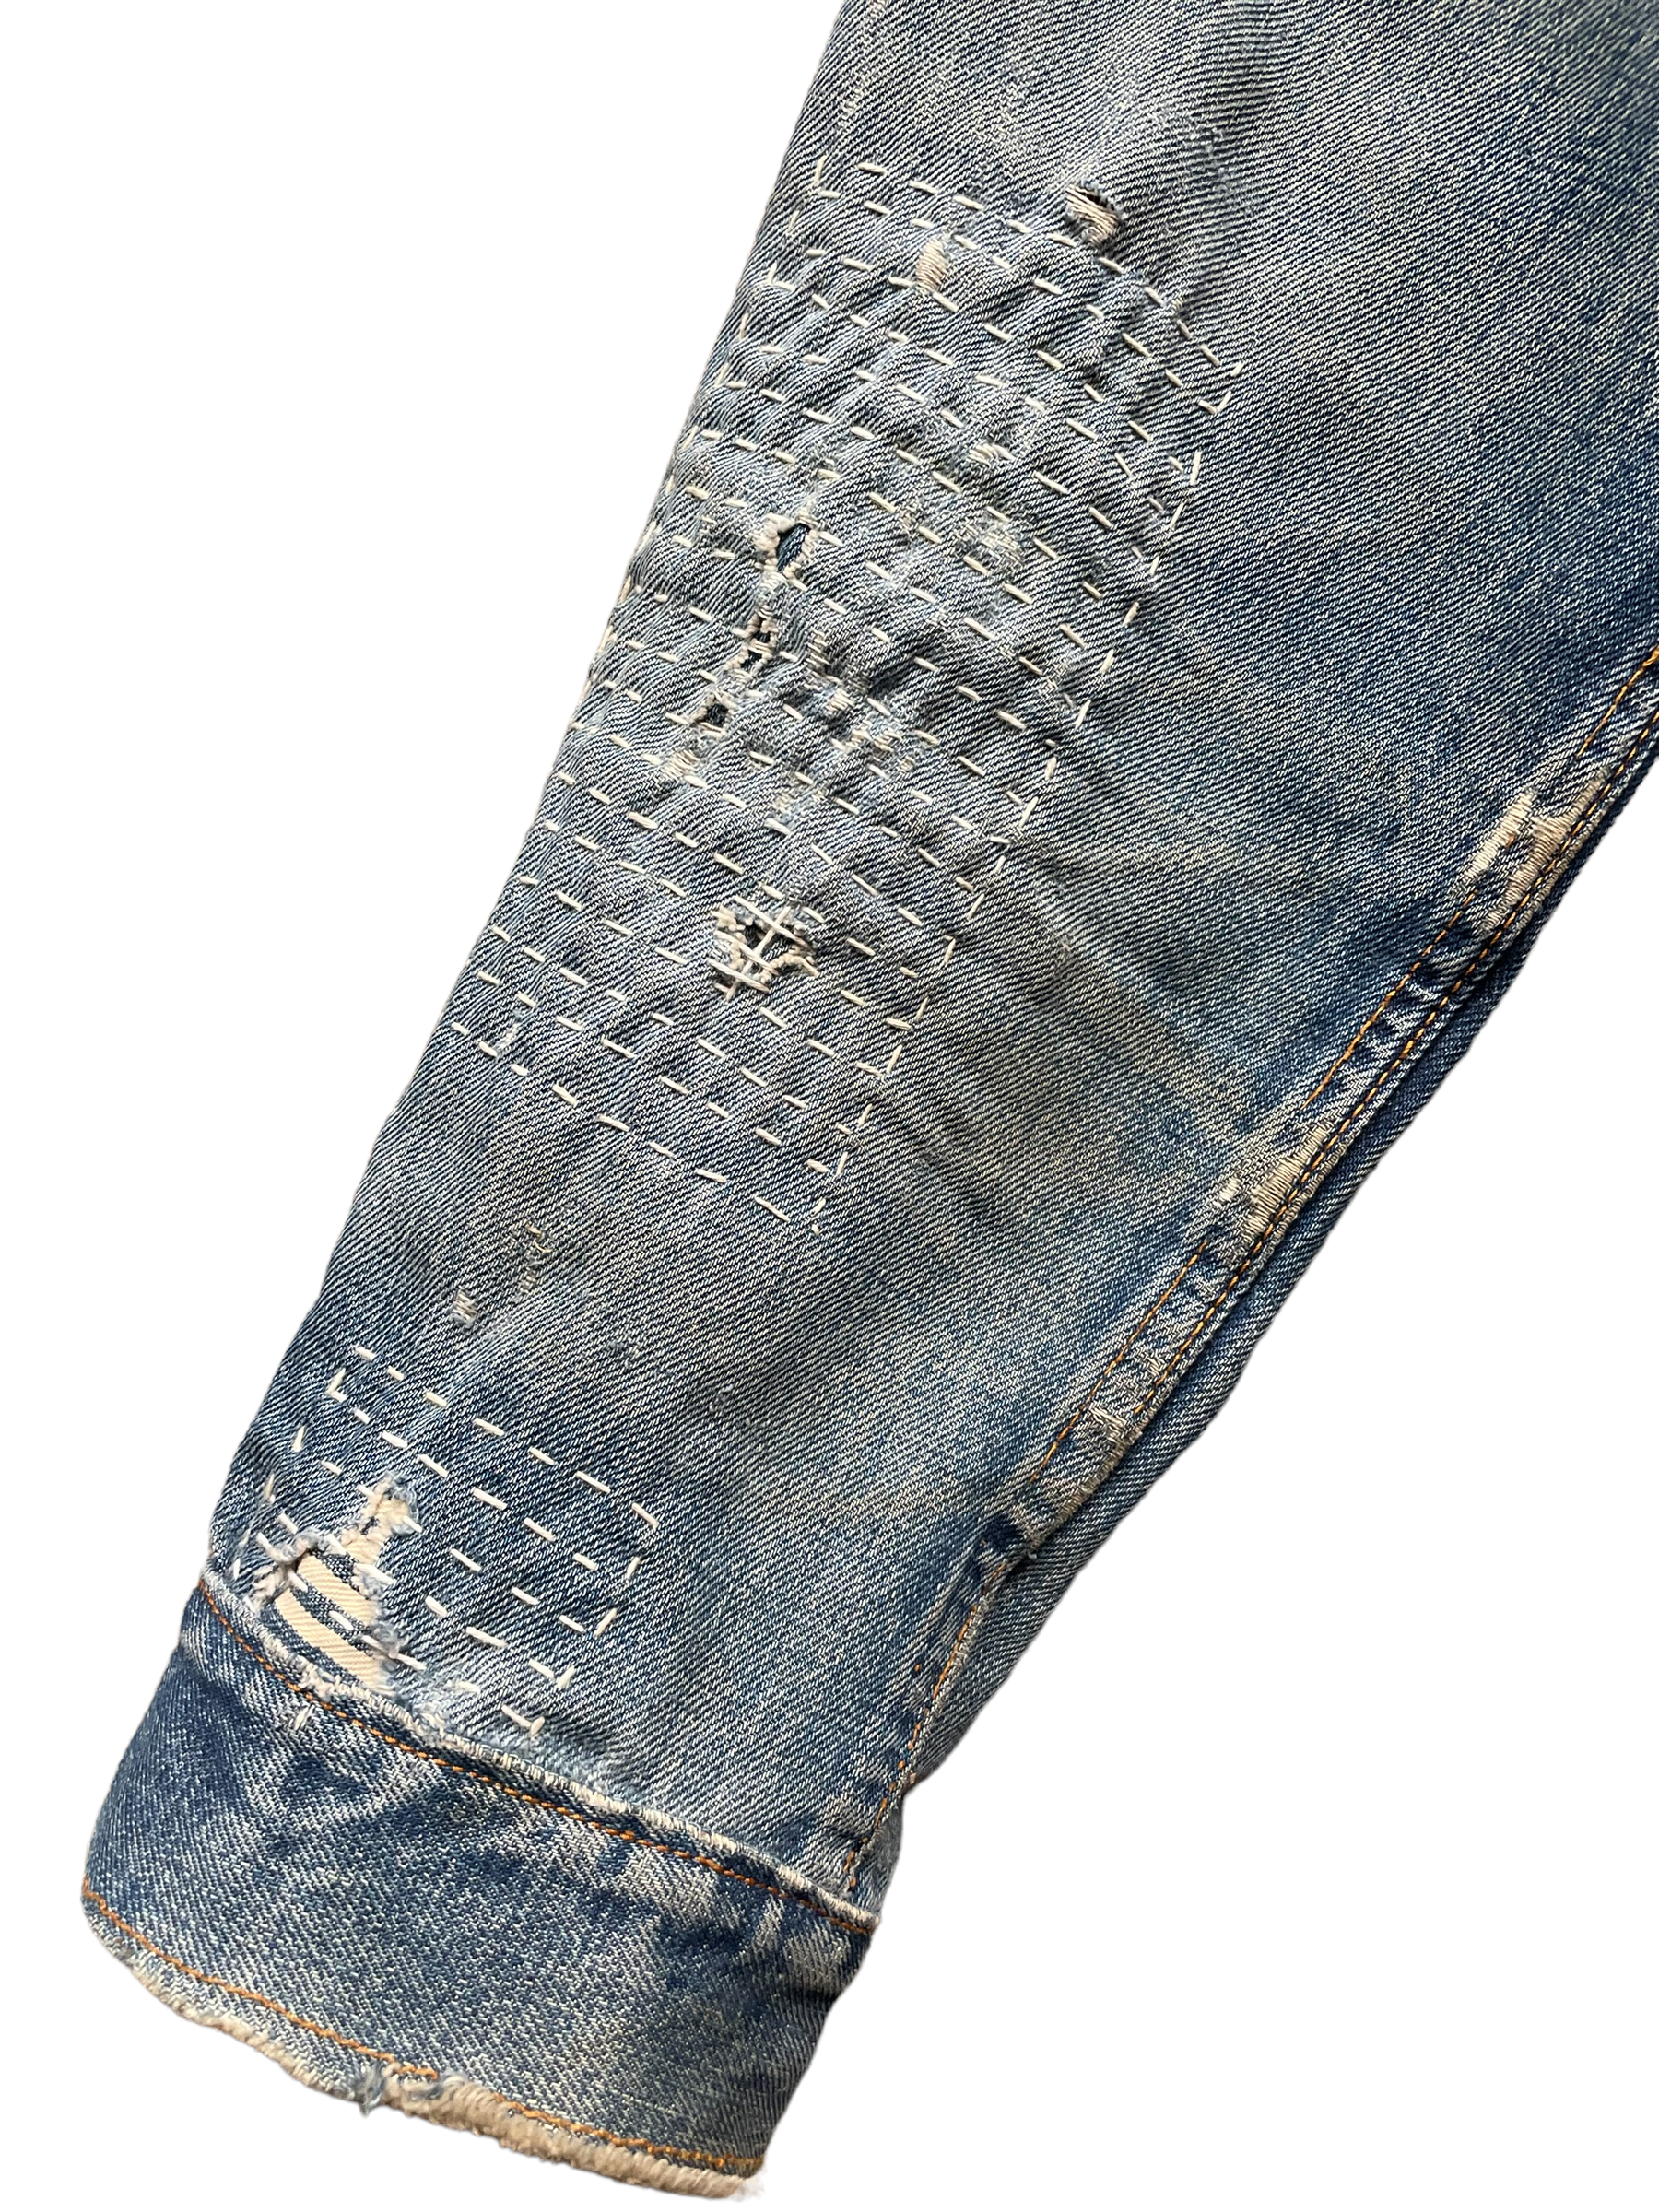 Right Sleeve Detail on Visibly Mended Vintage Levi’s Big E Type III | Barn Owl Vintage | Seattle True Vintage